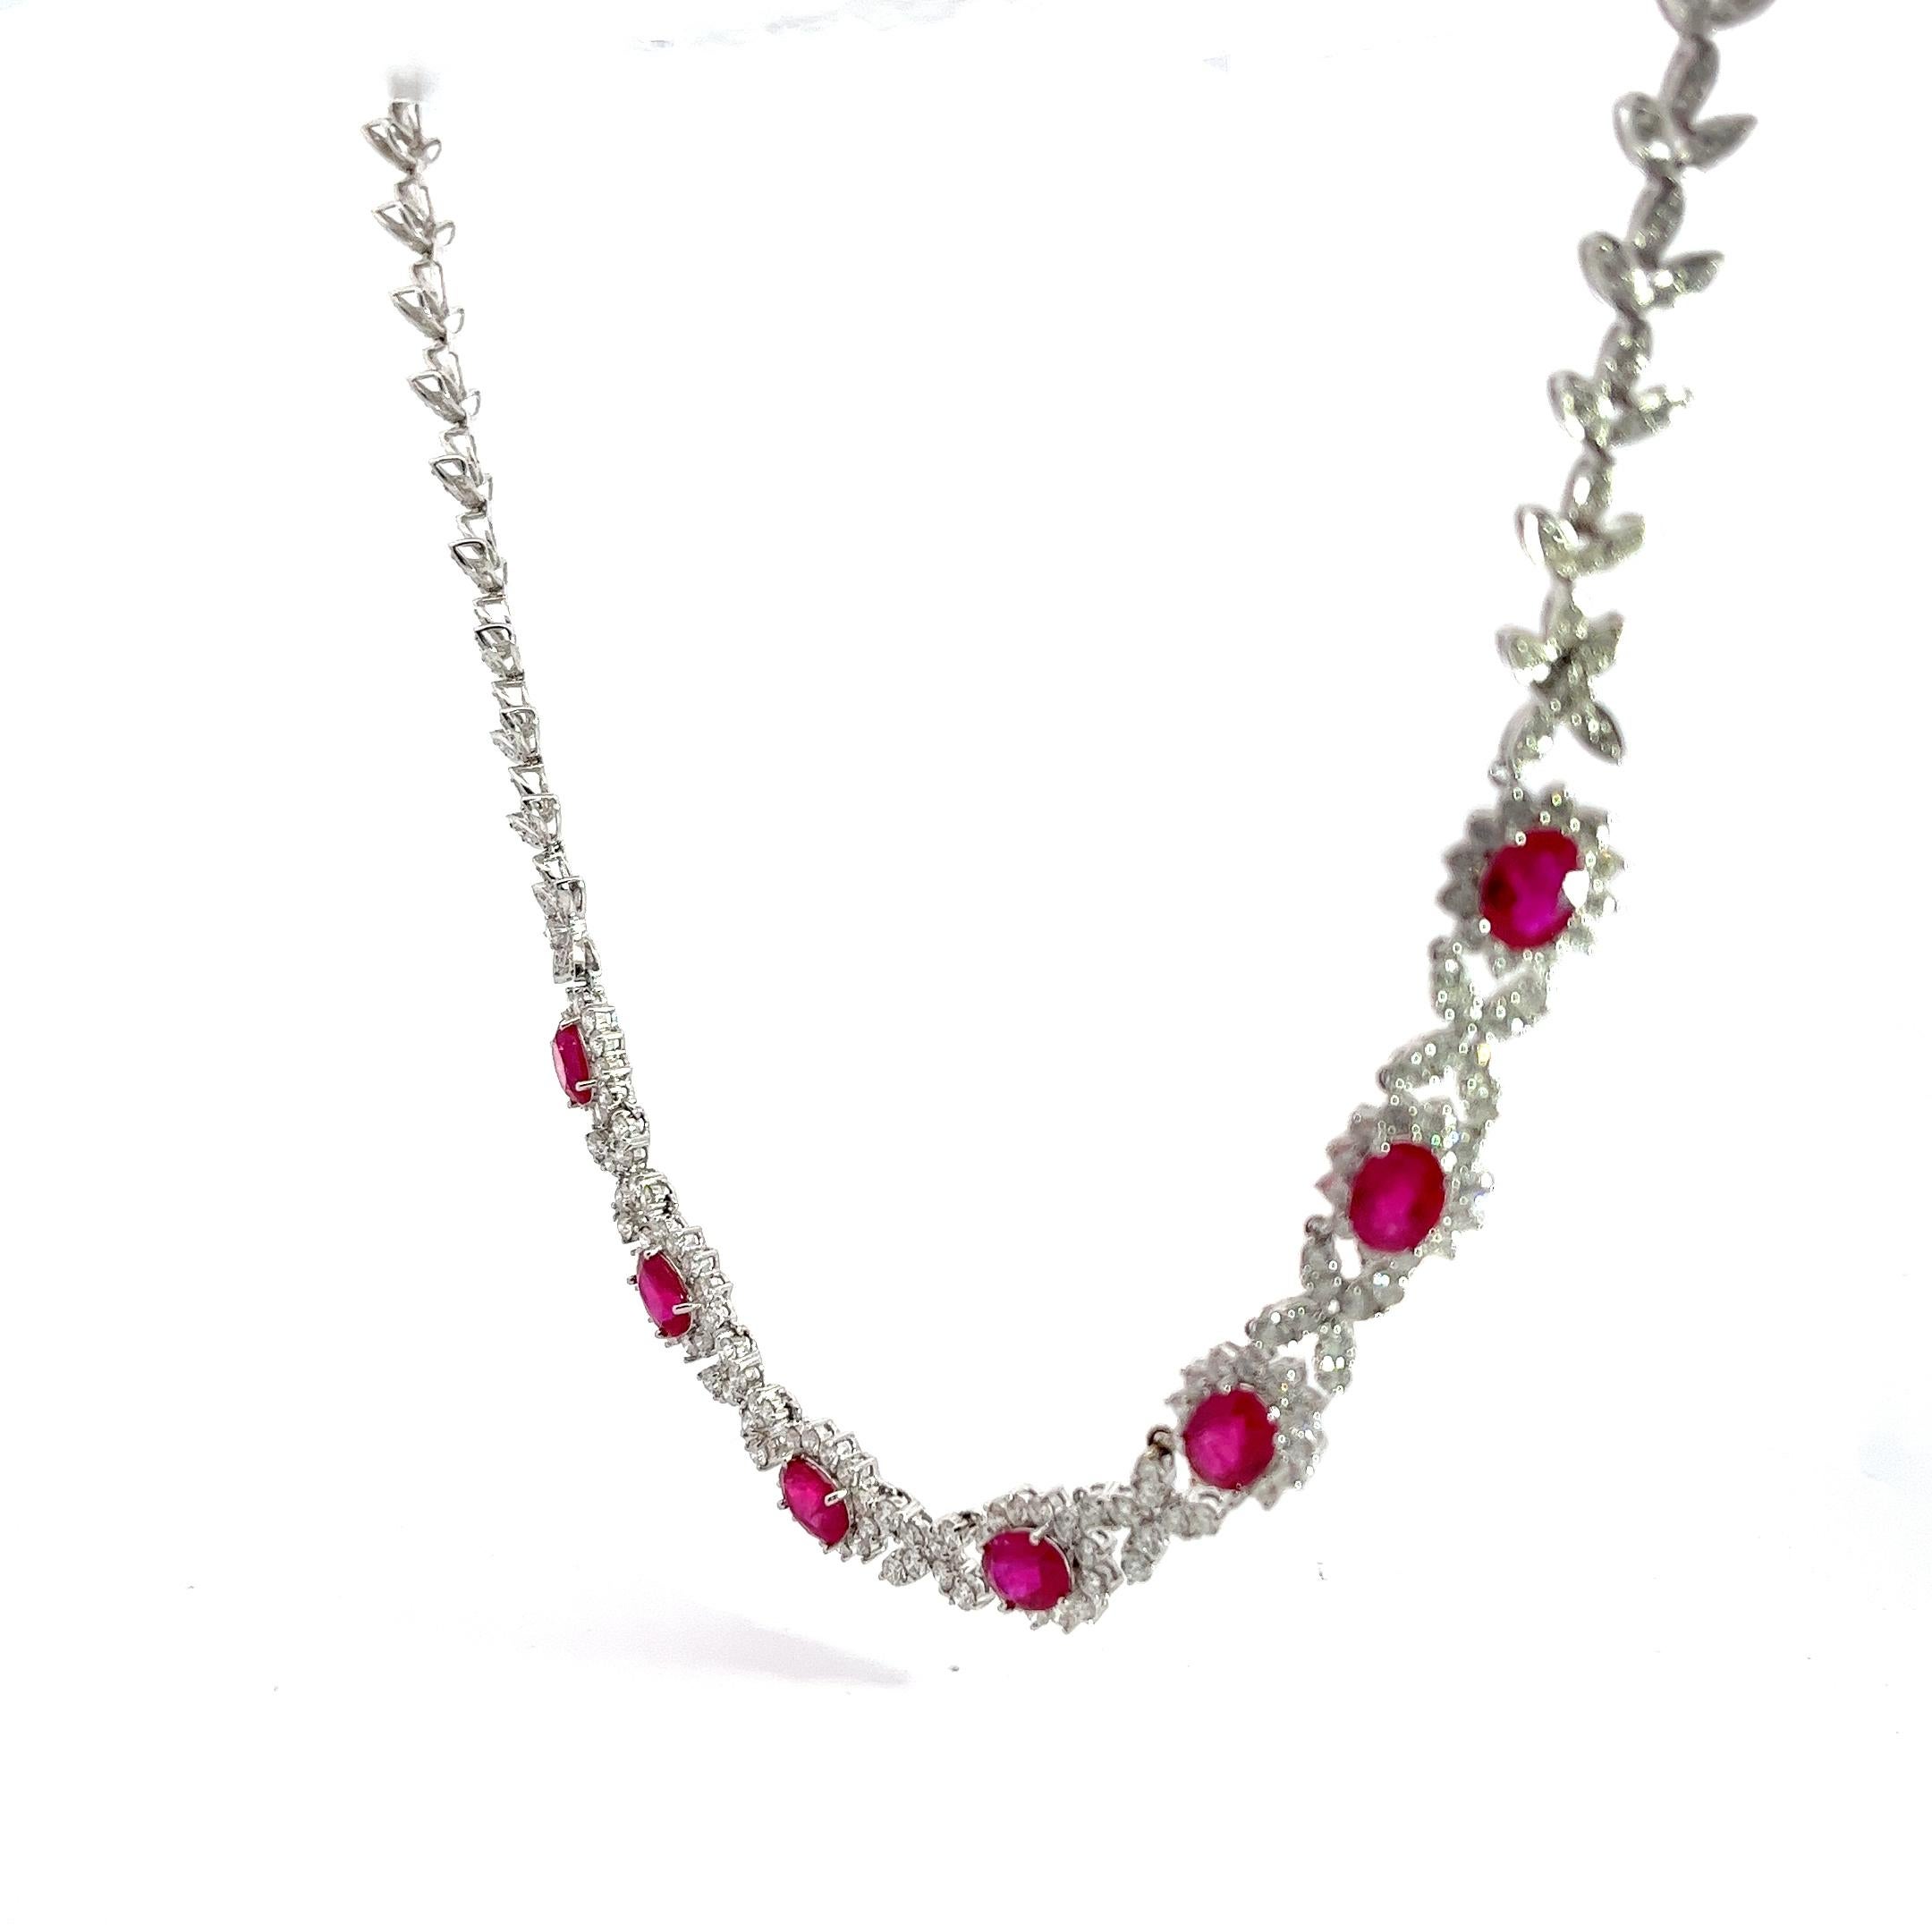 GIA Certified Burma Ruby Diamond 18K Gold Necklace

Accompanied by GIA report Number:
2233008358


The report states that the tested Rubies are:

Vivid Red - PIDGEON'S BLOOD in color
- Burmese Origin and have been heated (moderate